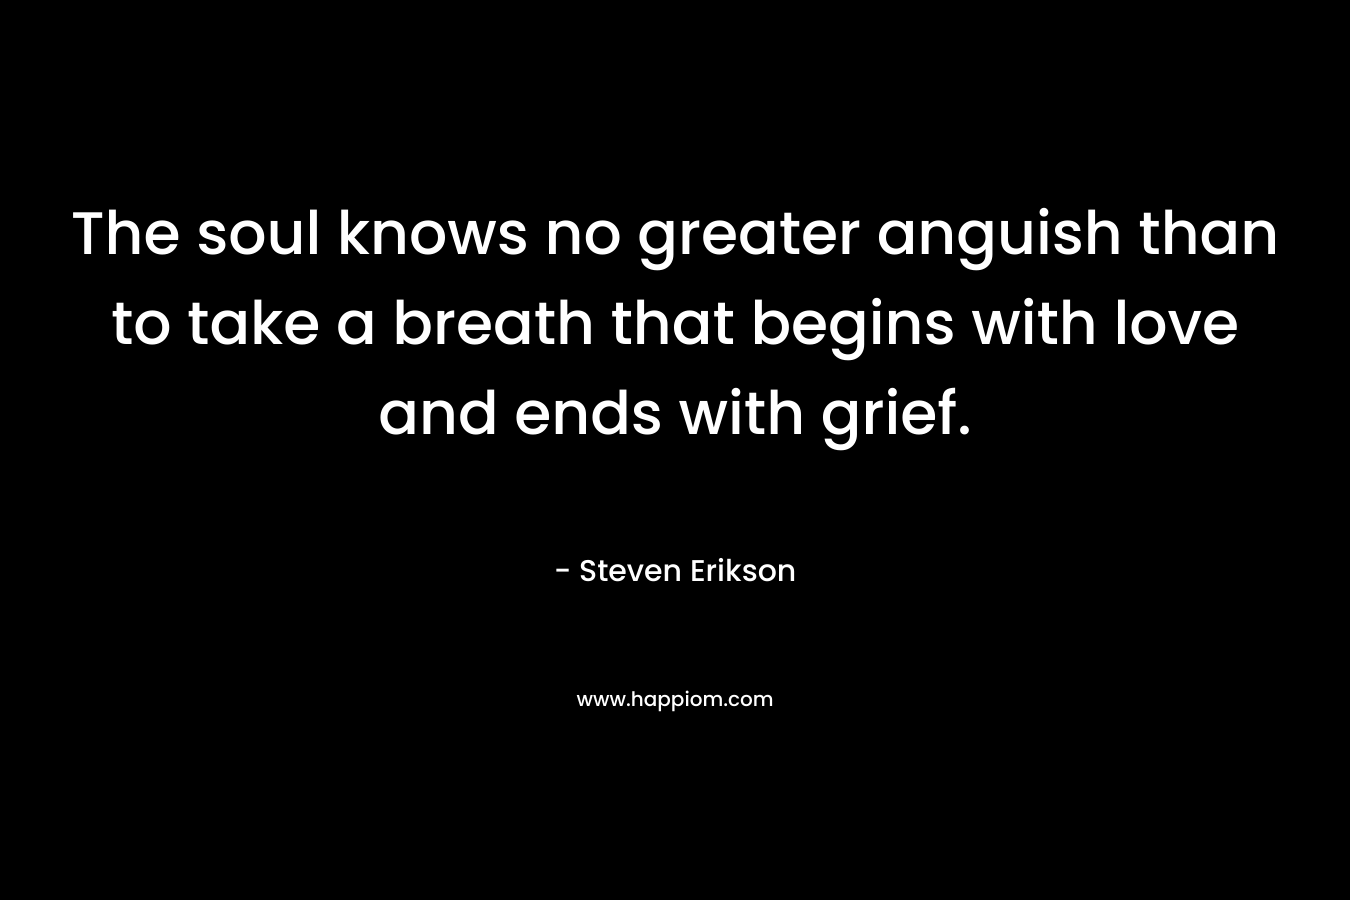 The soul knows no greater anguish than to take a breath that begins with love and ends with grief. – Steven Erikson